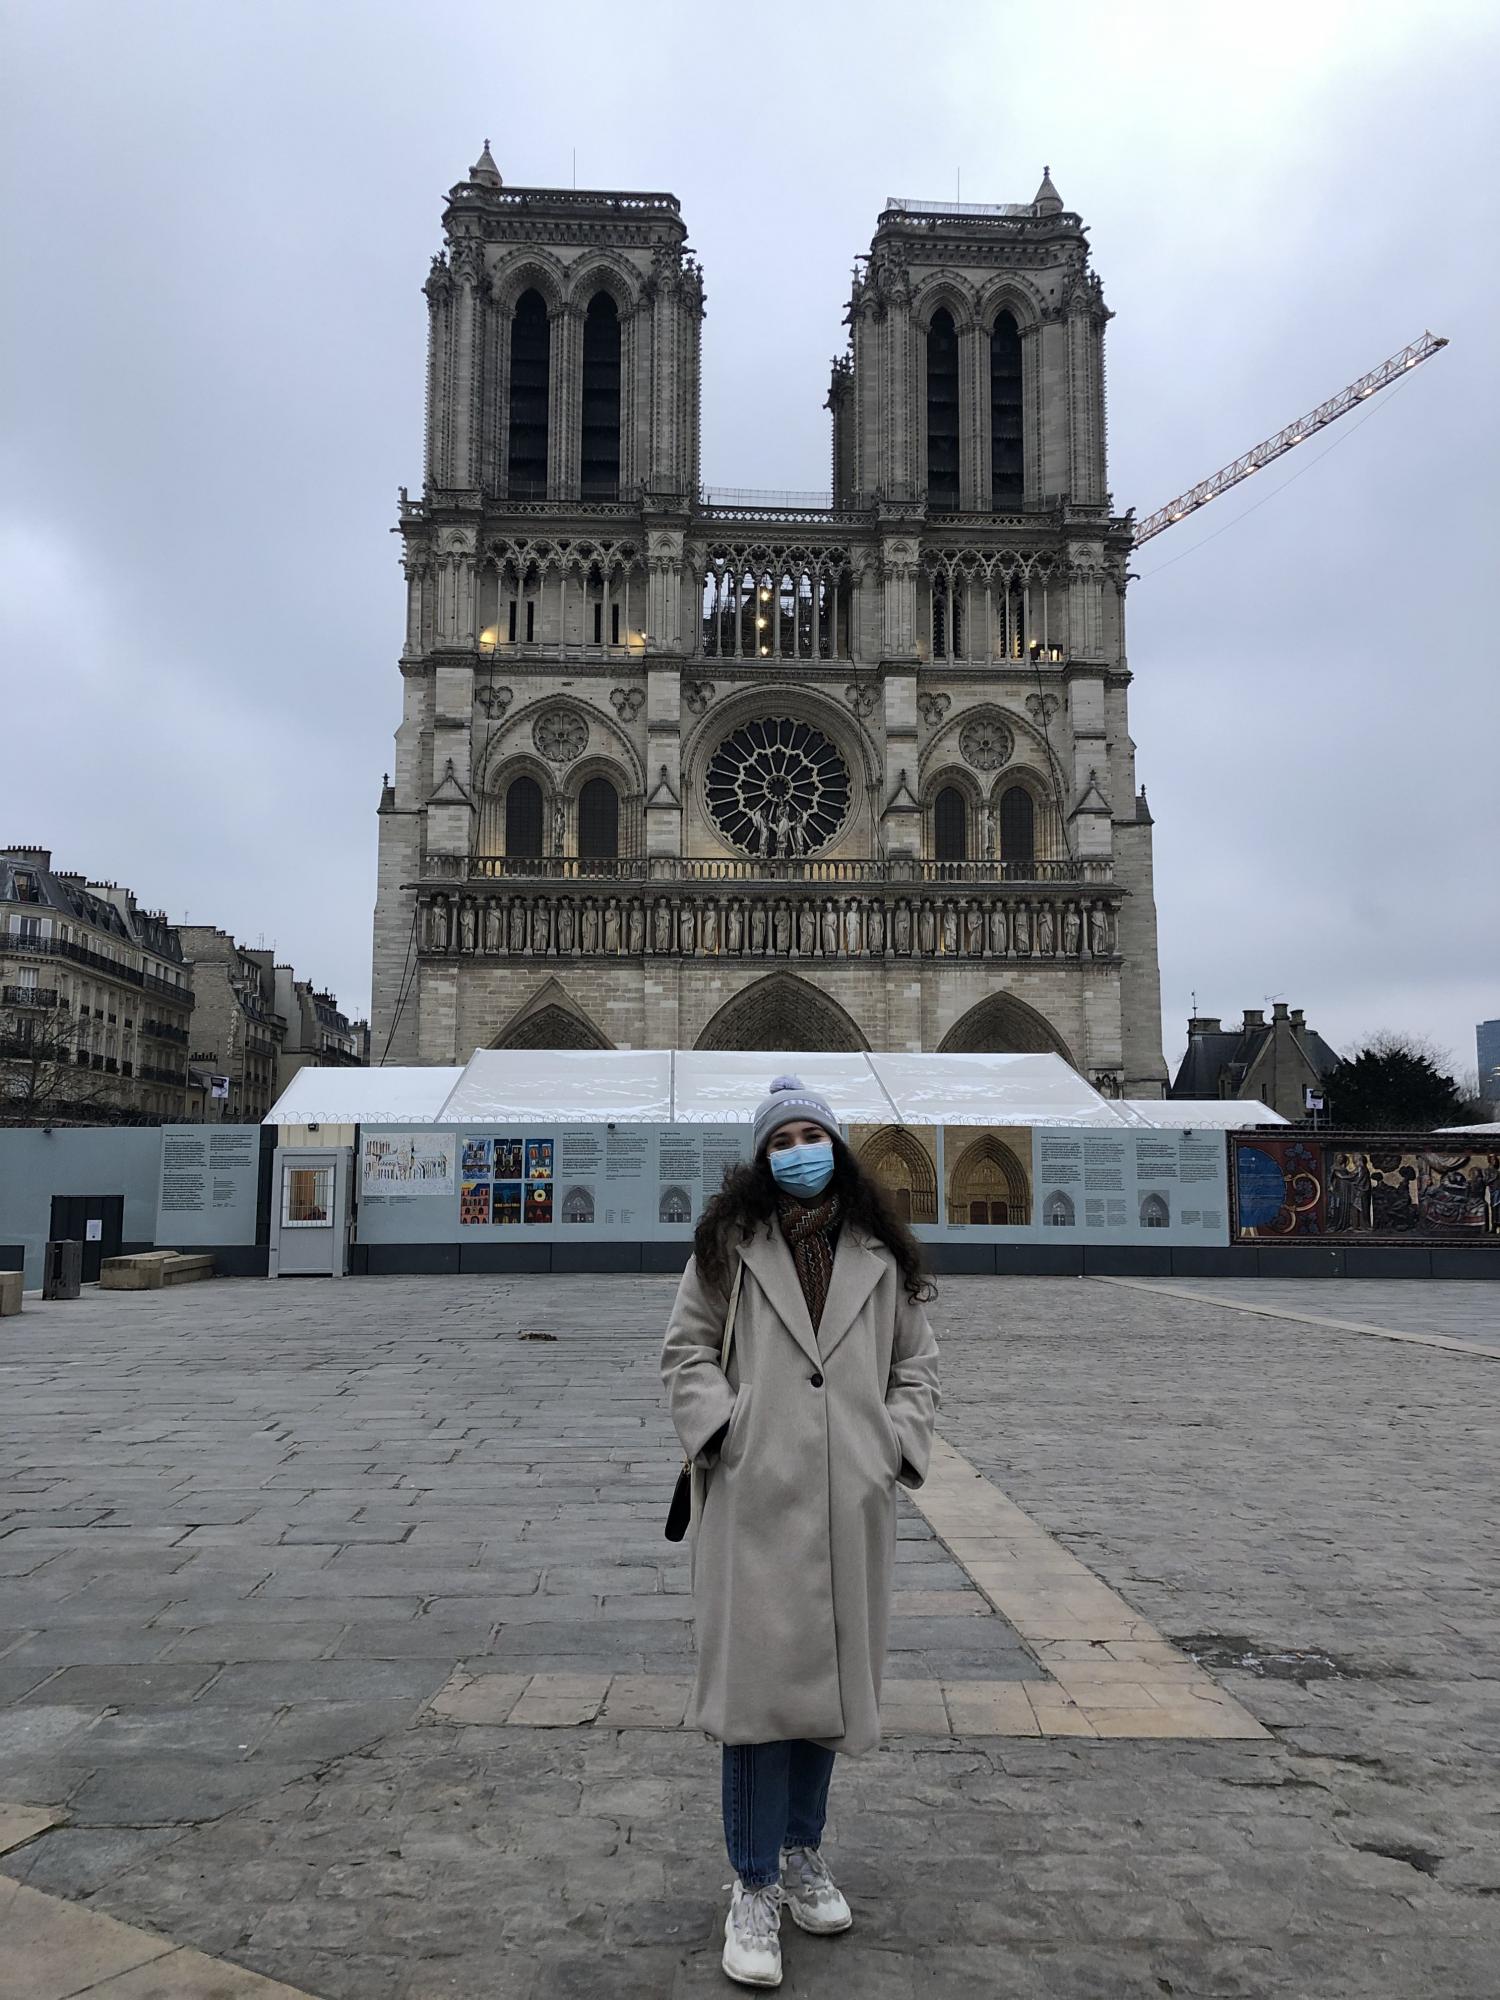 Van Dijke stands in front of the Notre Dame on a chilly day.